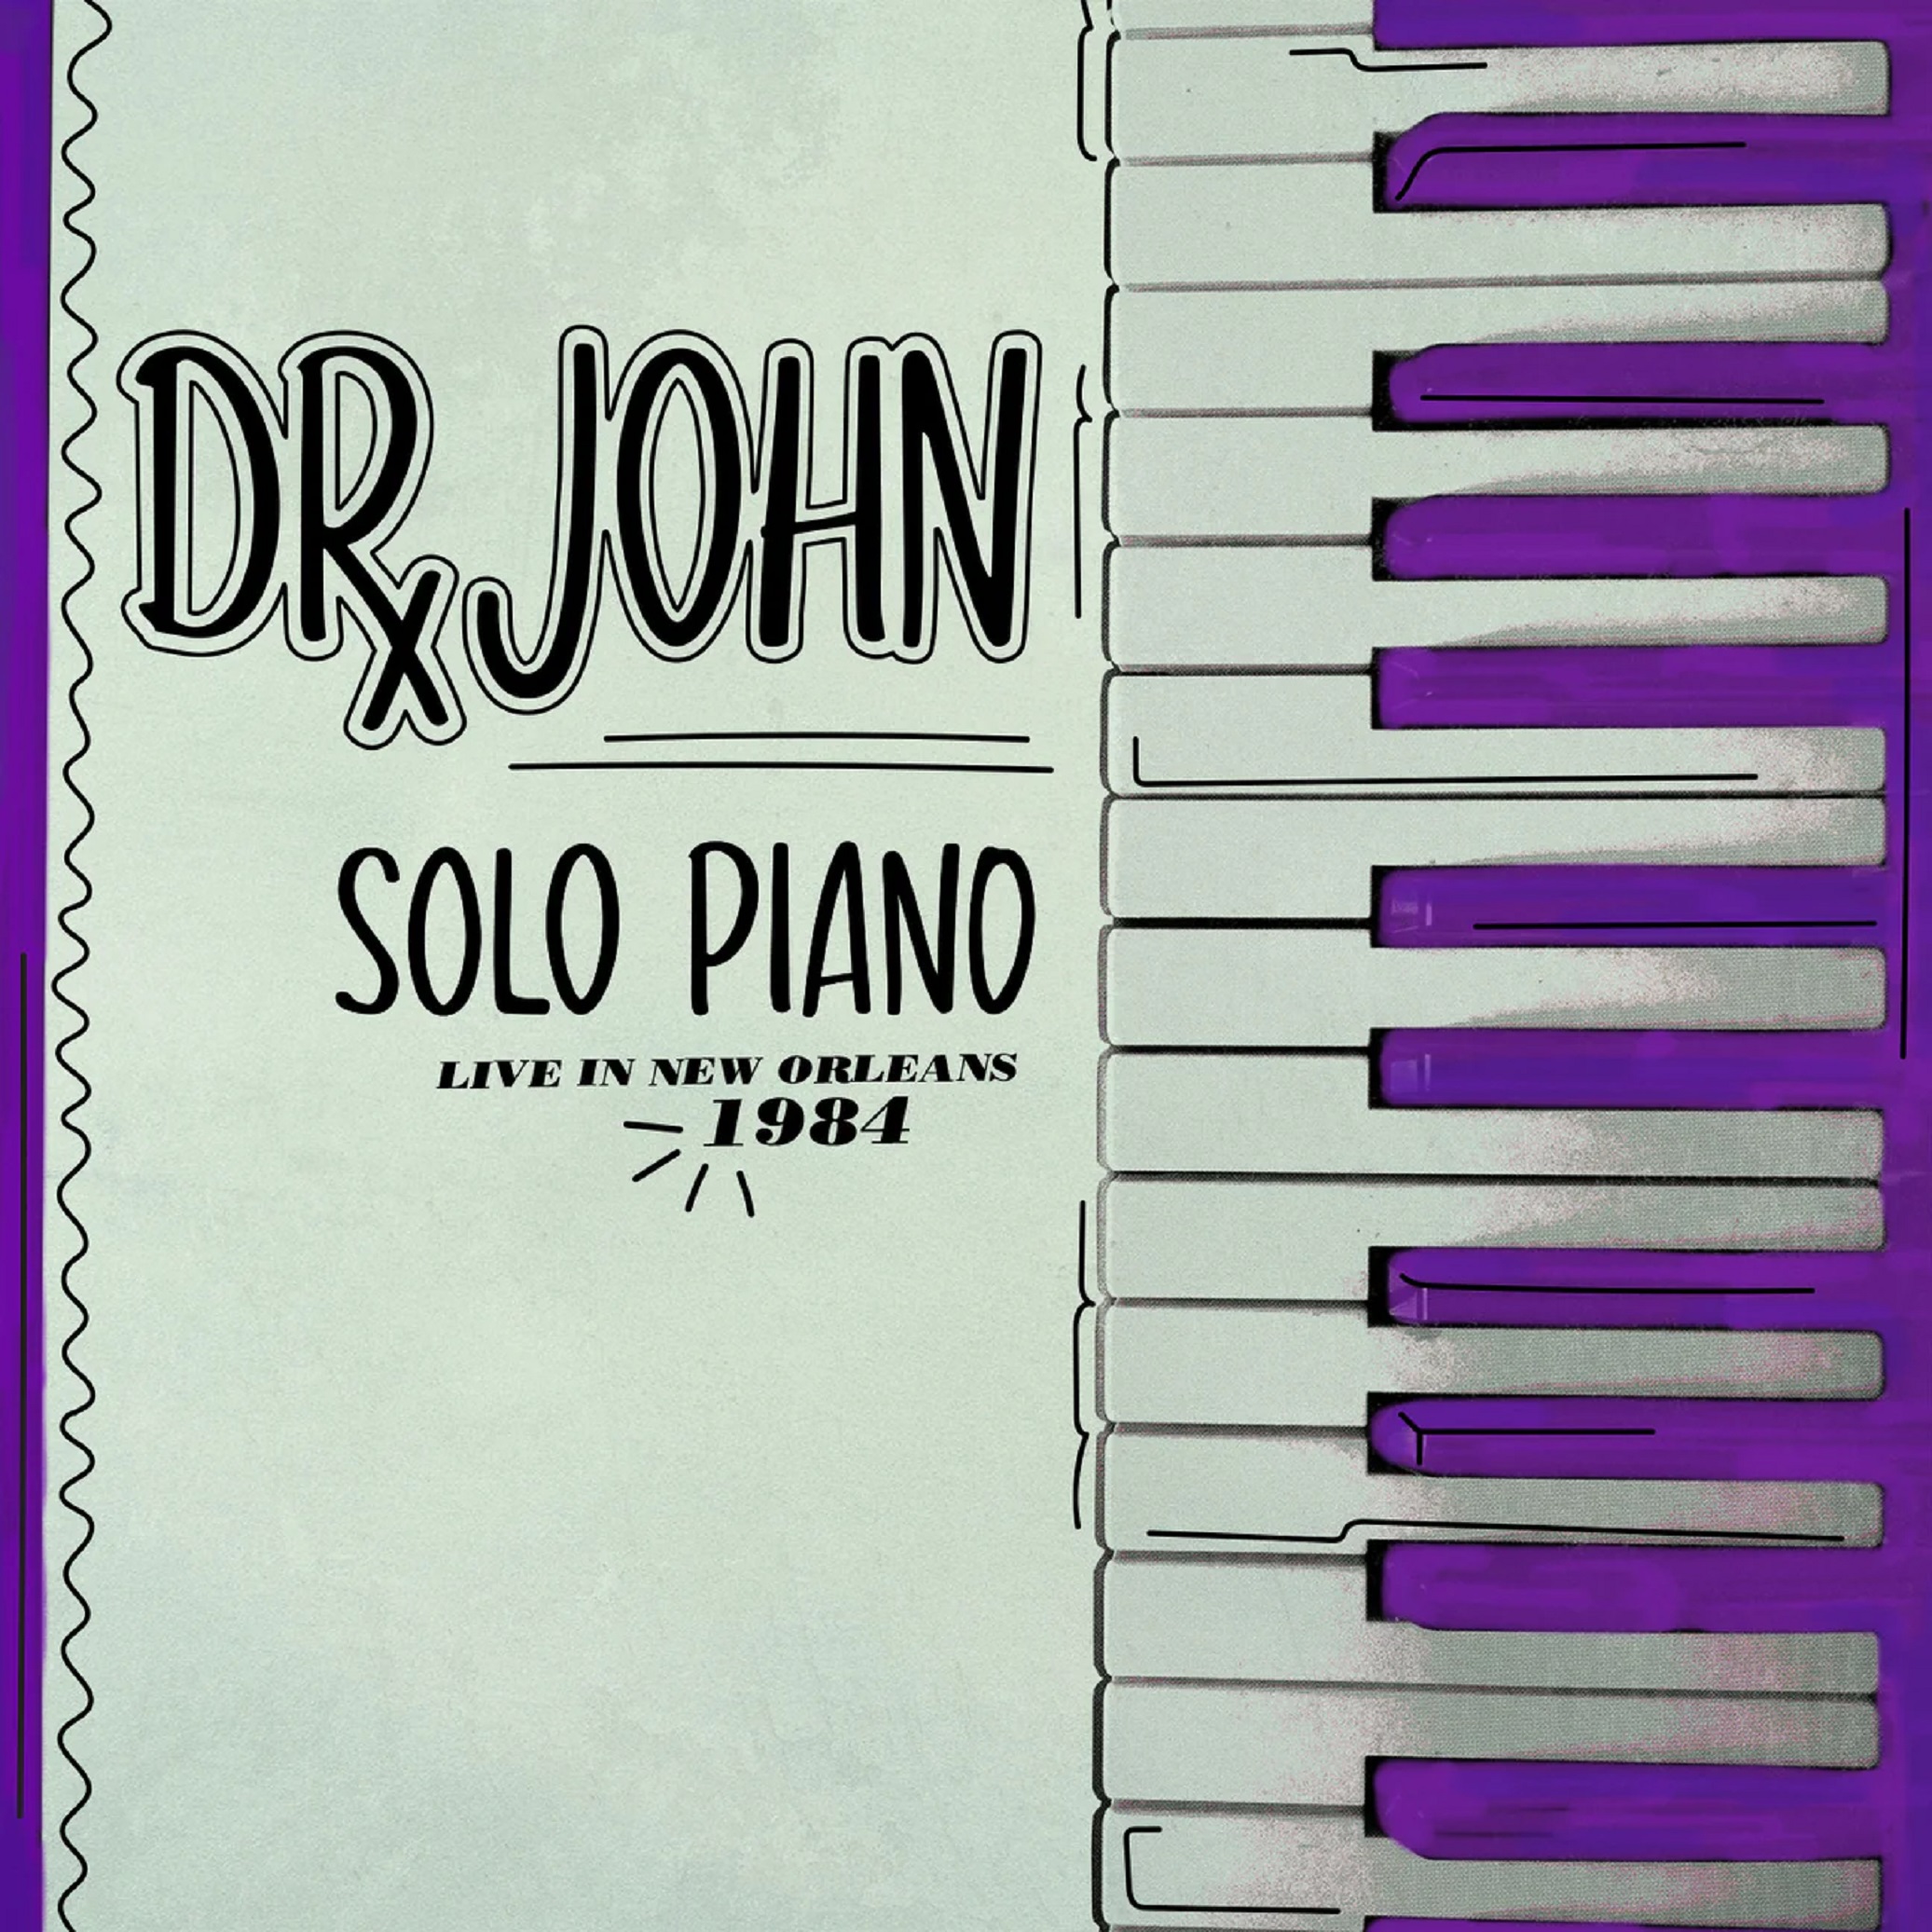 Dr. John's "Solo Piano Live in New Orleans 1984" out via Tipitina’s Record Club